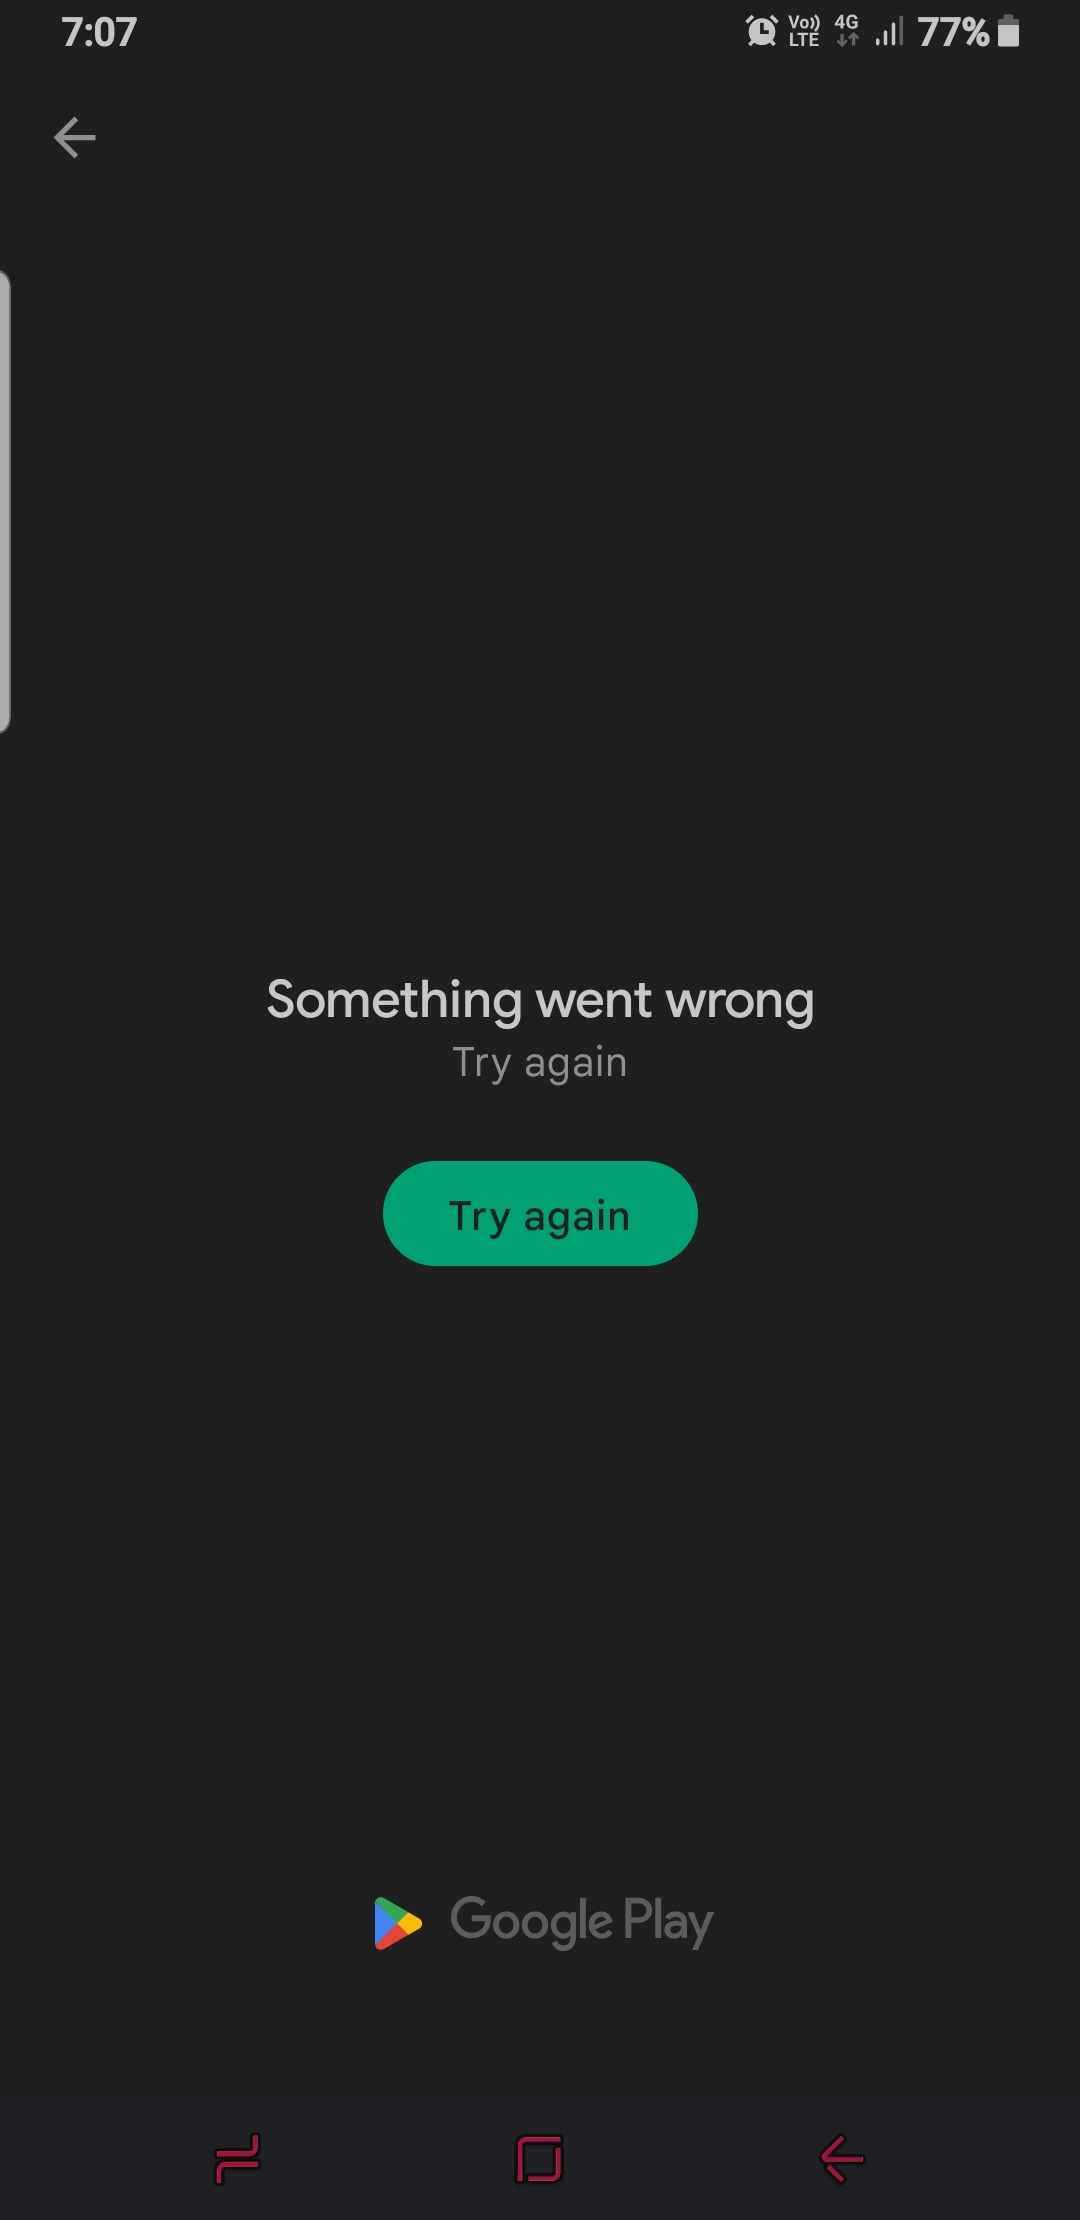 Fix Problems Signing in to Google Play Games or other apps, Login Problem